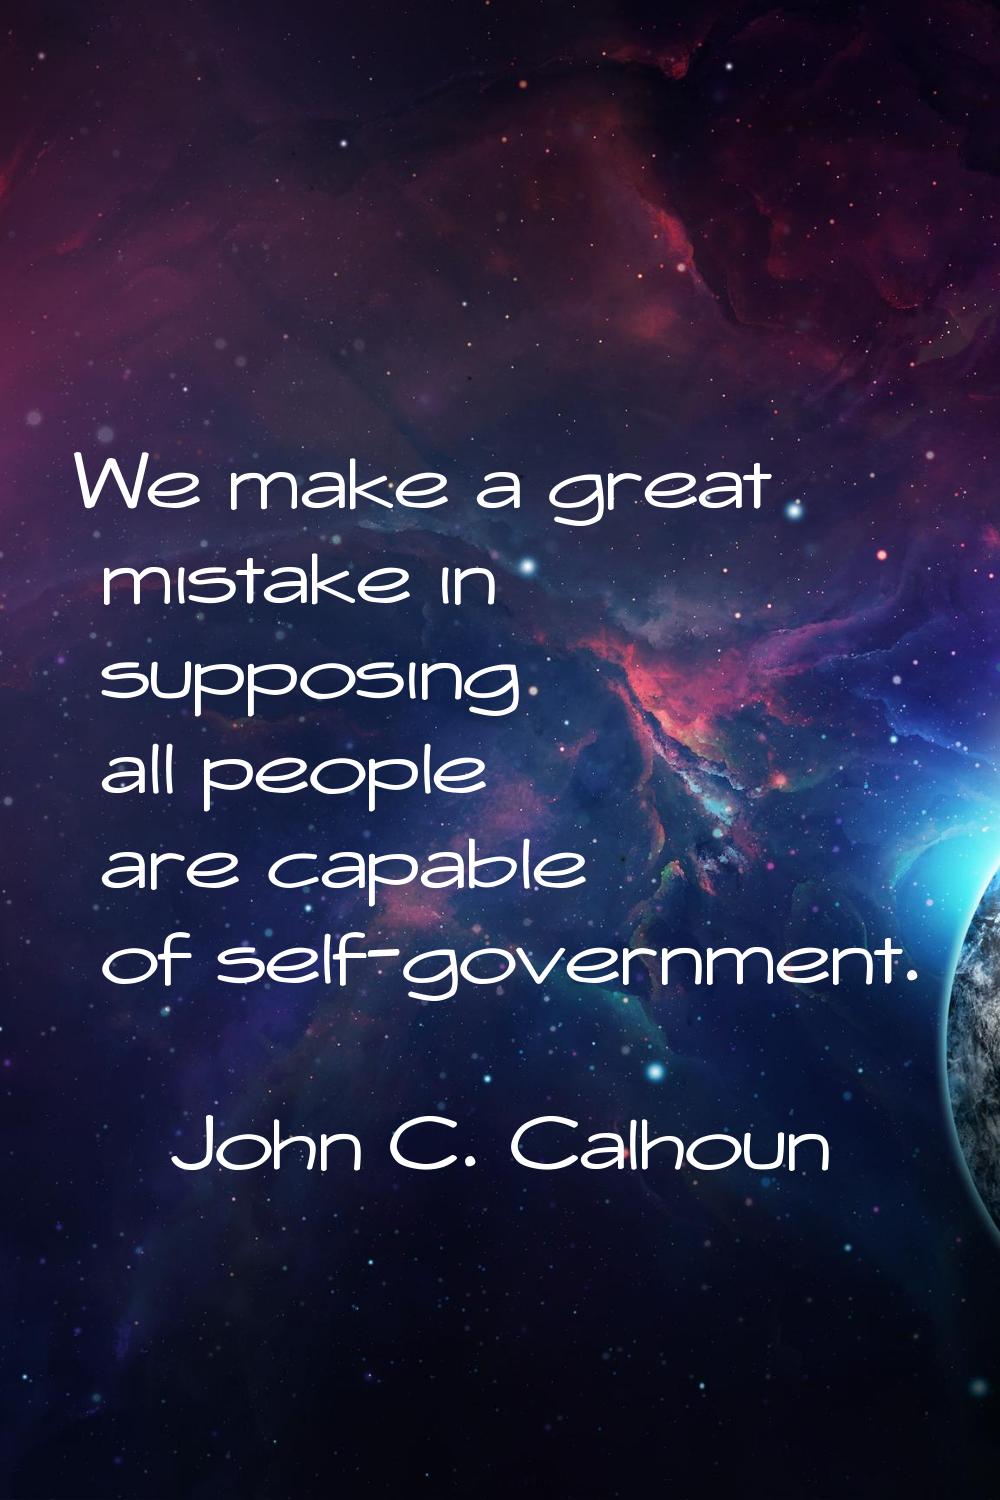 We make a great mistake in supposing all people are capable of self-government.